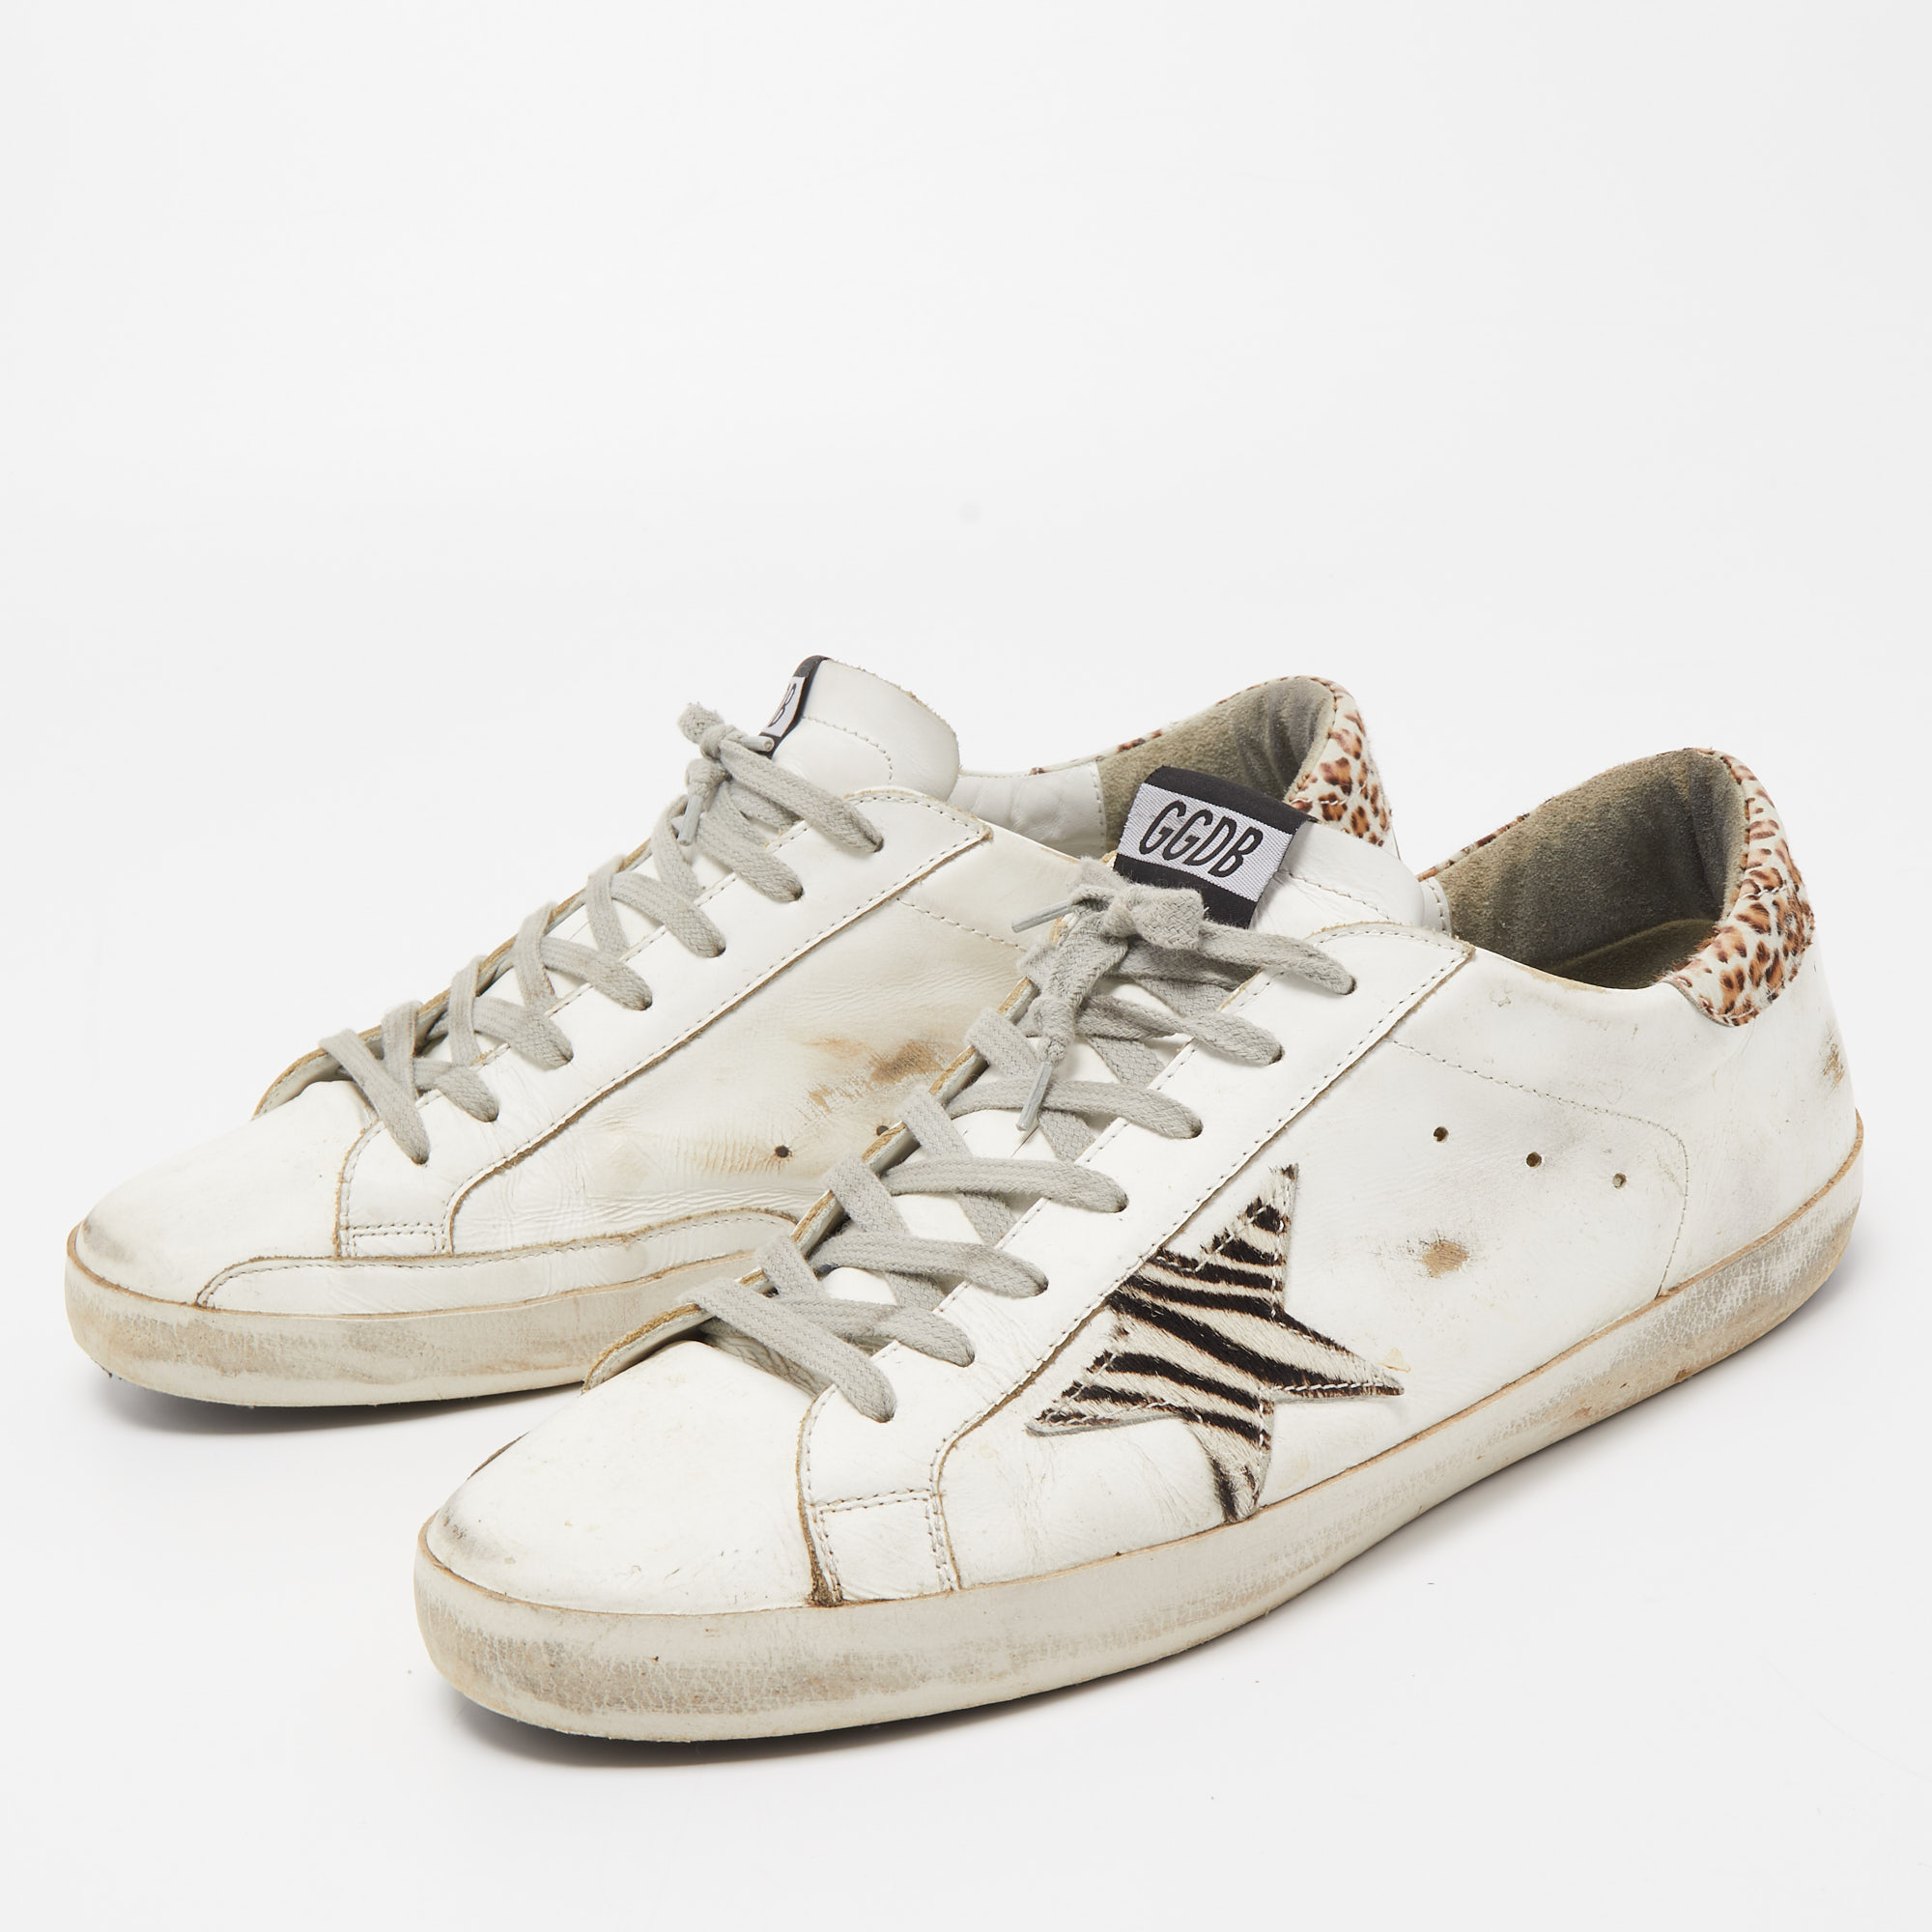 

Golden Goose White/Brown Leather and Leopard Print Calf Hair Superstar Sneakers Size